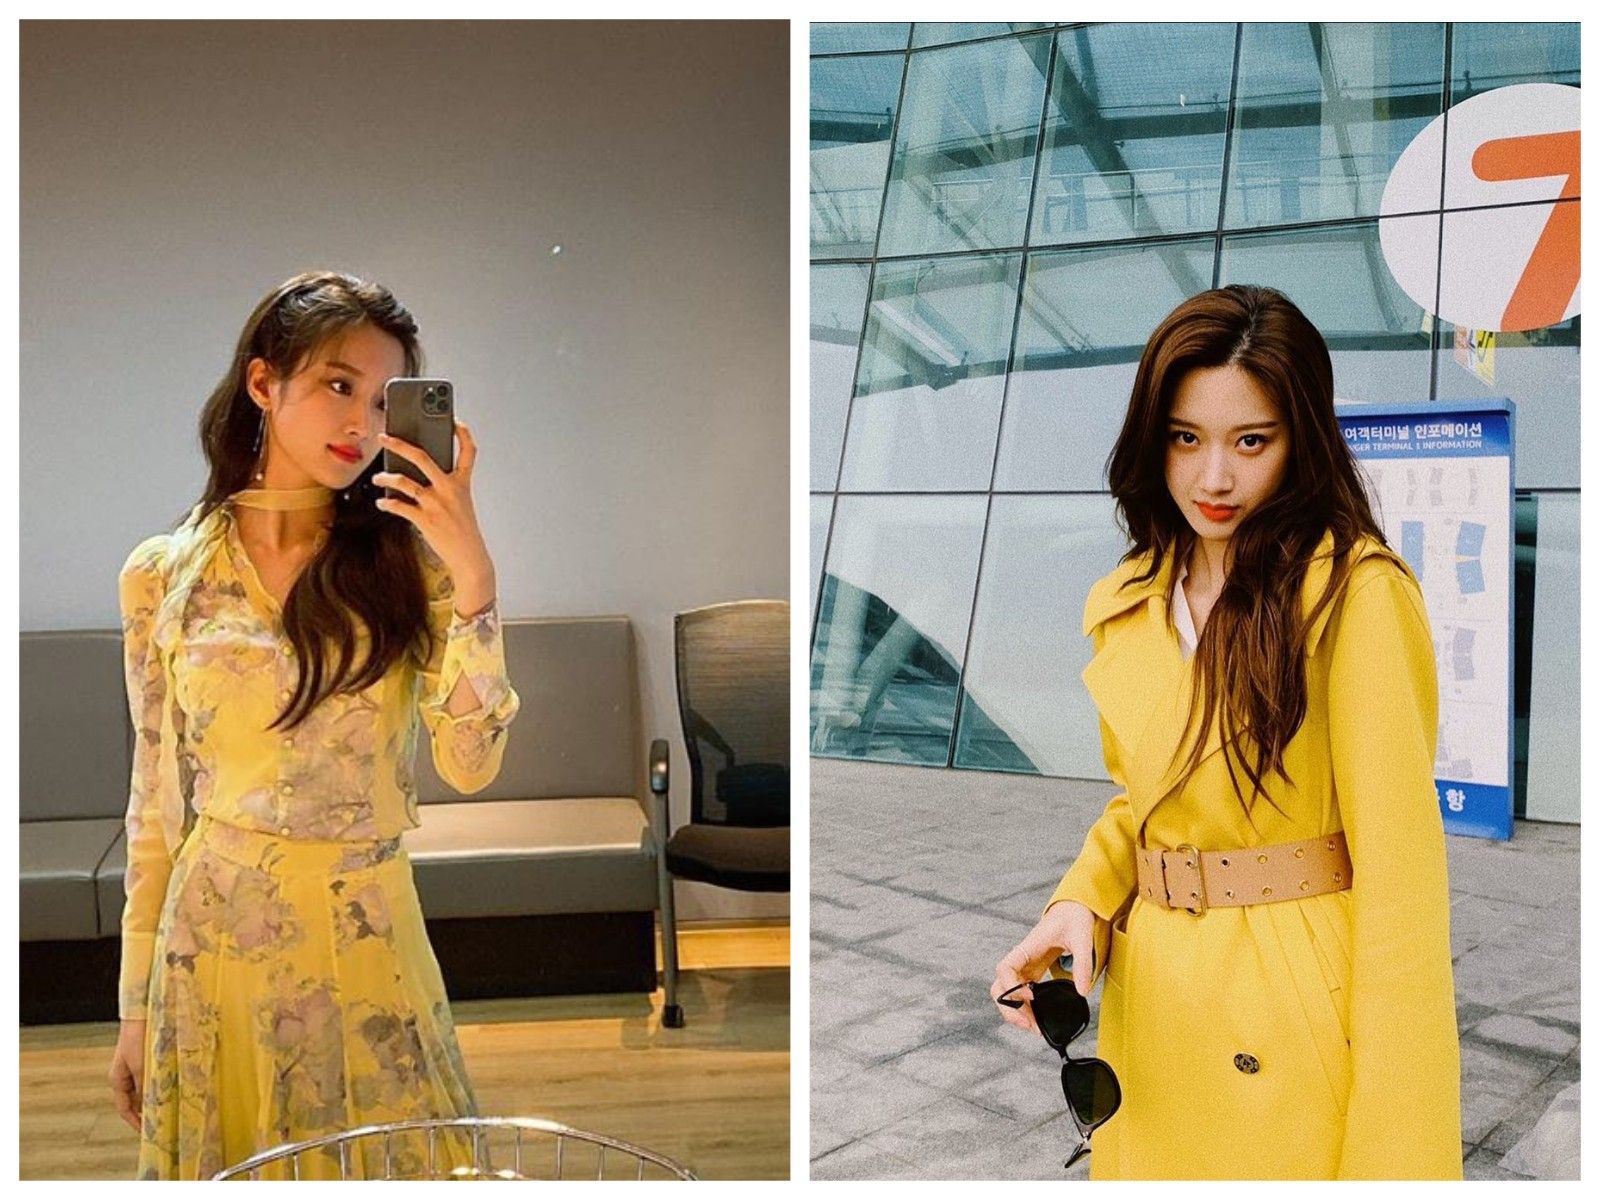 Moon Ga Young Opens An Instagram Account Dedicated To Her Find Me